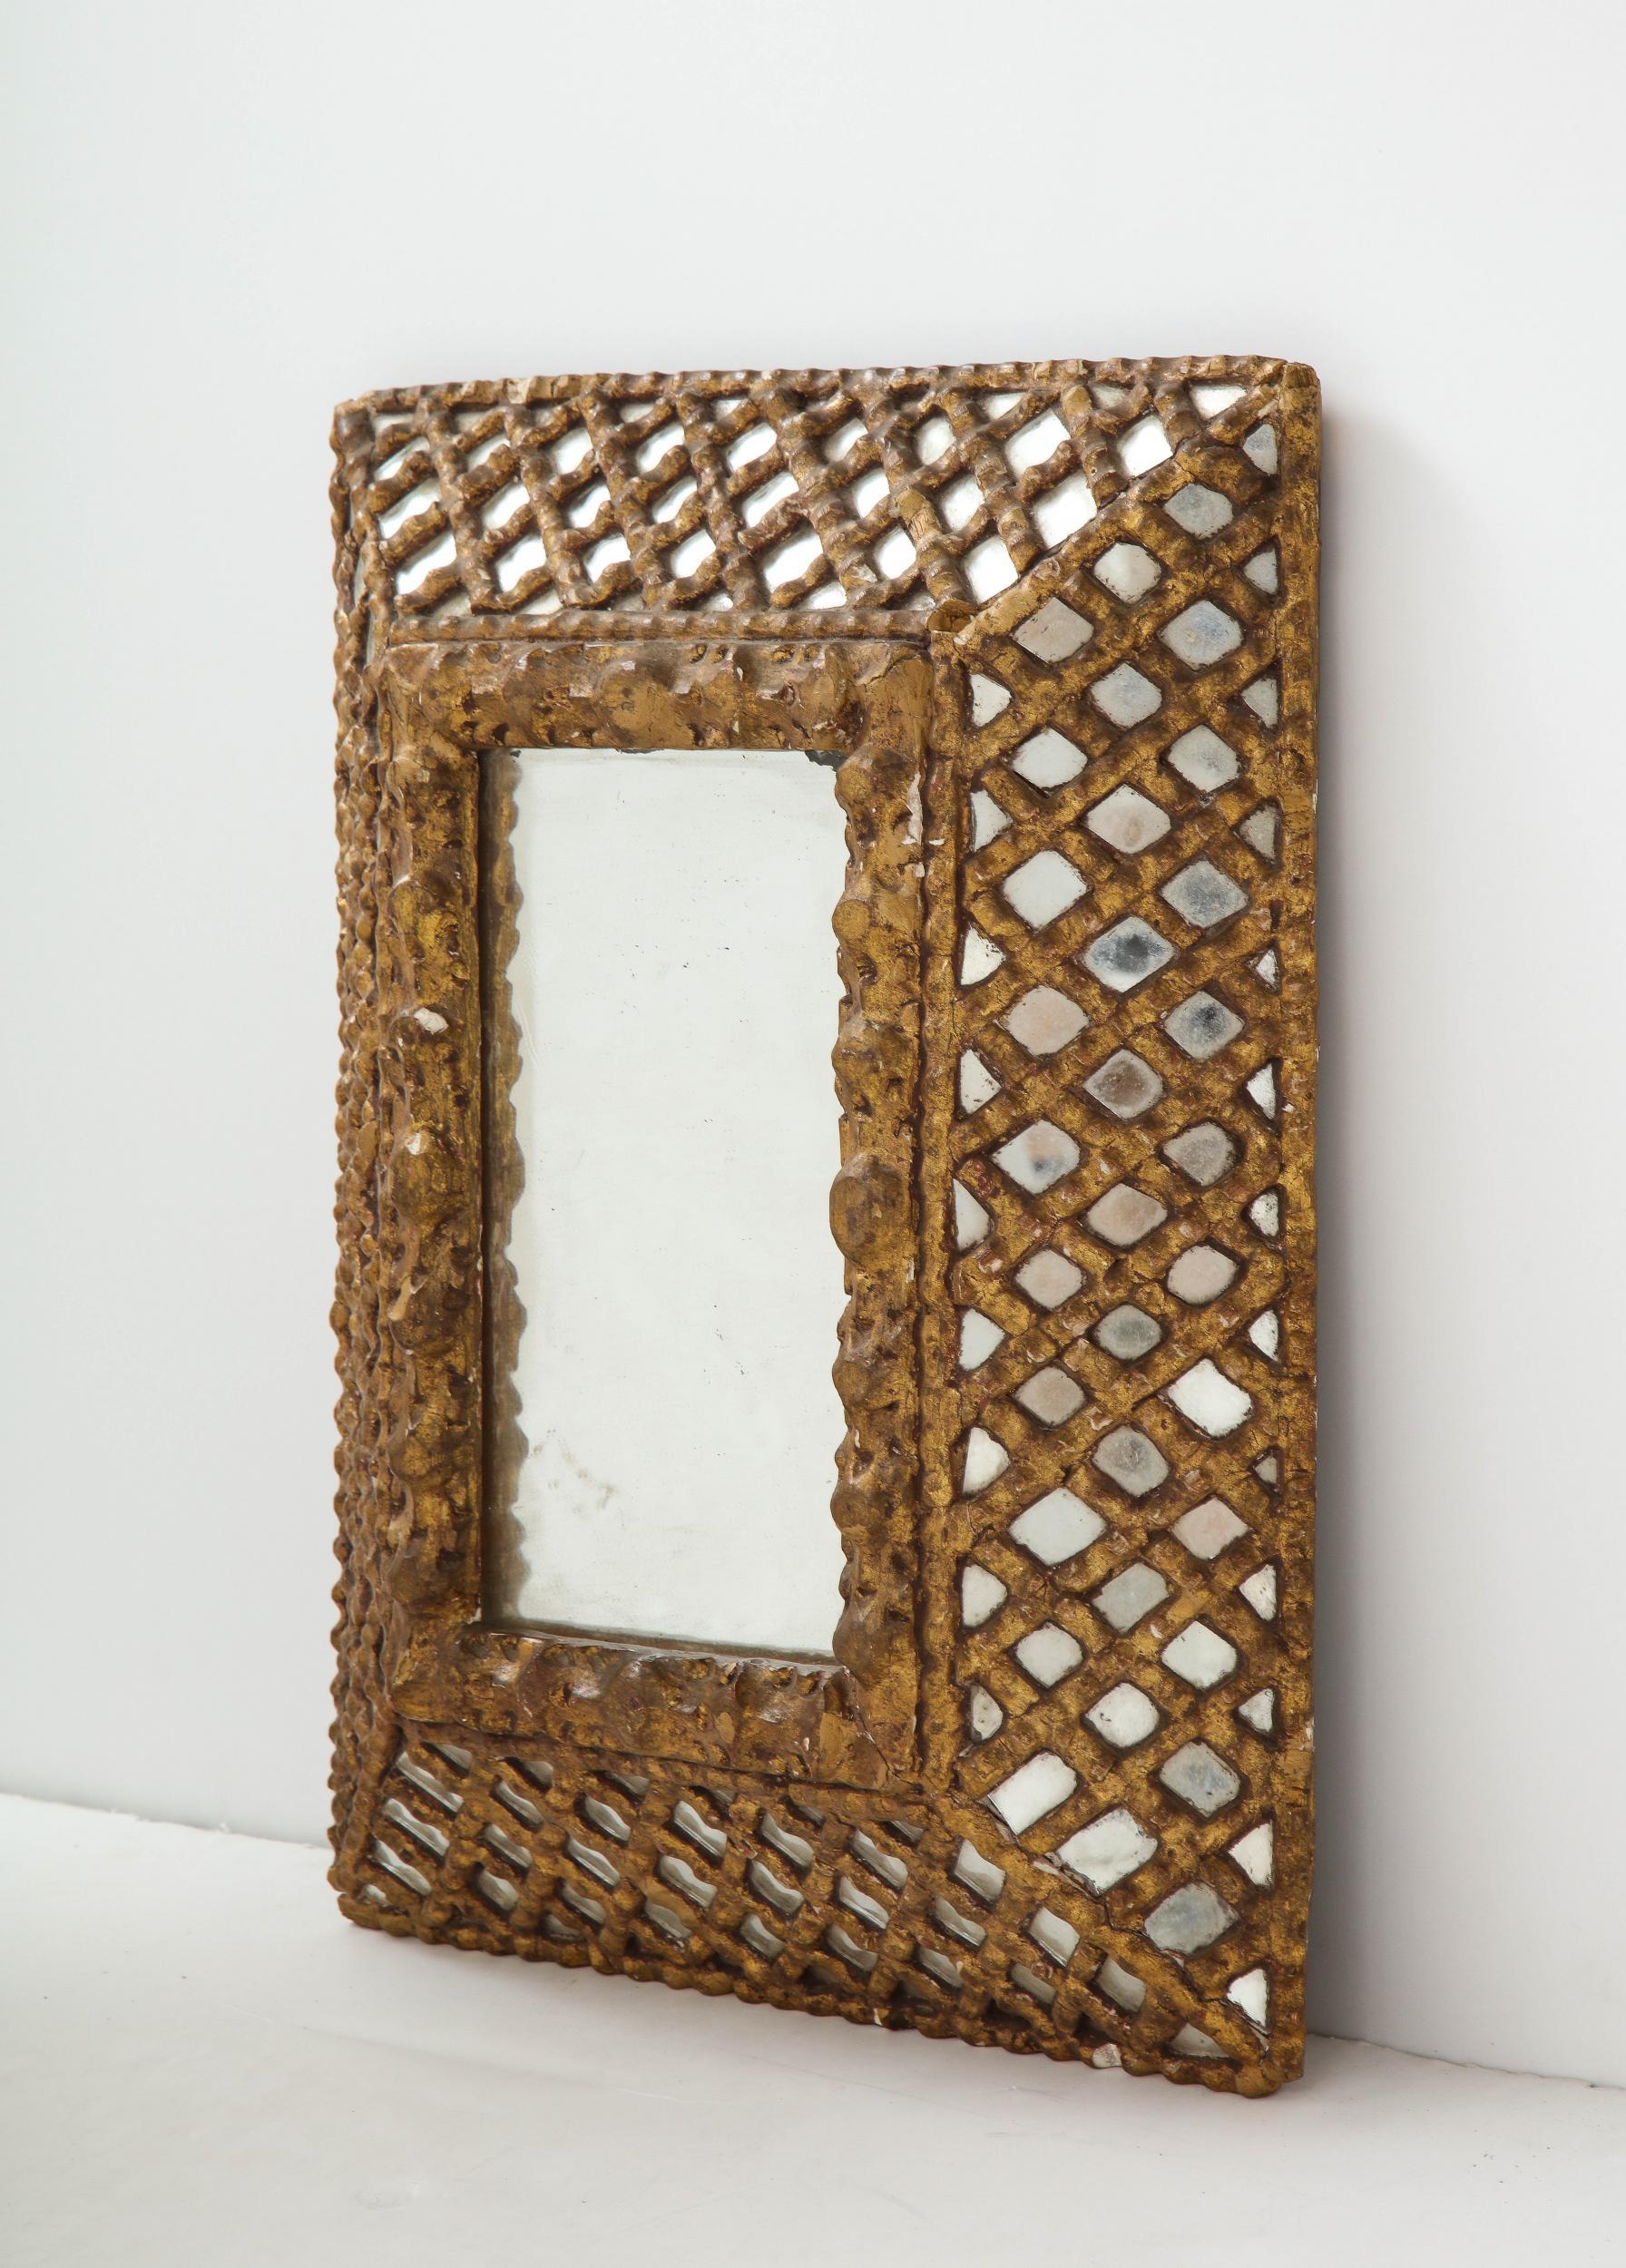 Early 20th-century gilt Indian mirror. 

An early 20th-century Indian gilded mirror with square corners and a deeply carved inner floral frame. The broad lattice style frame covers a mirror border creating an intricate diamond weave pattern. A